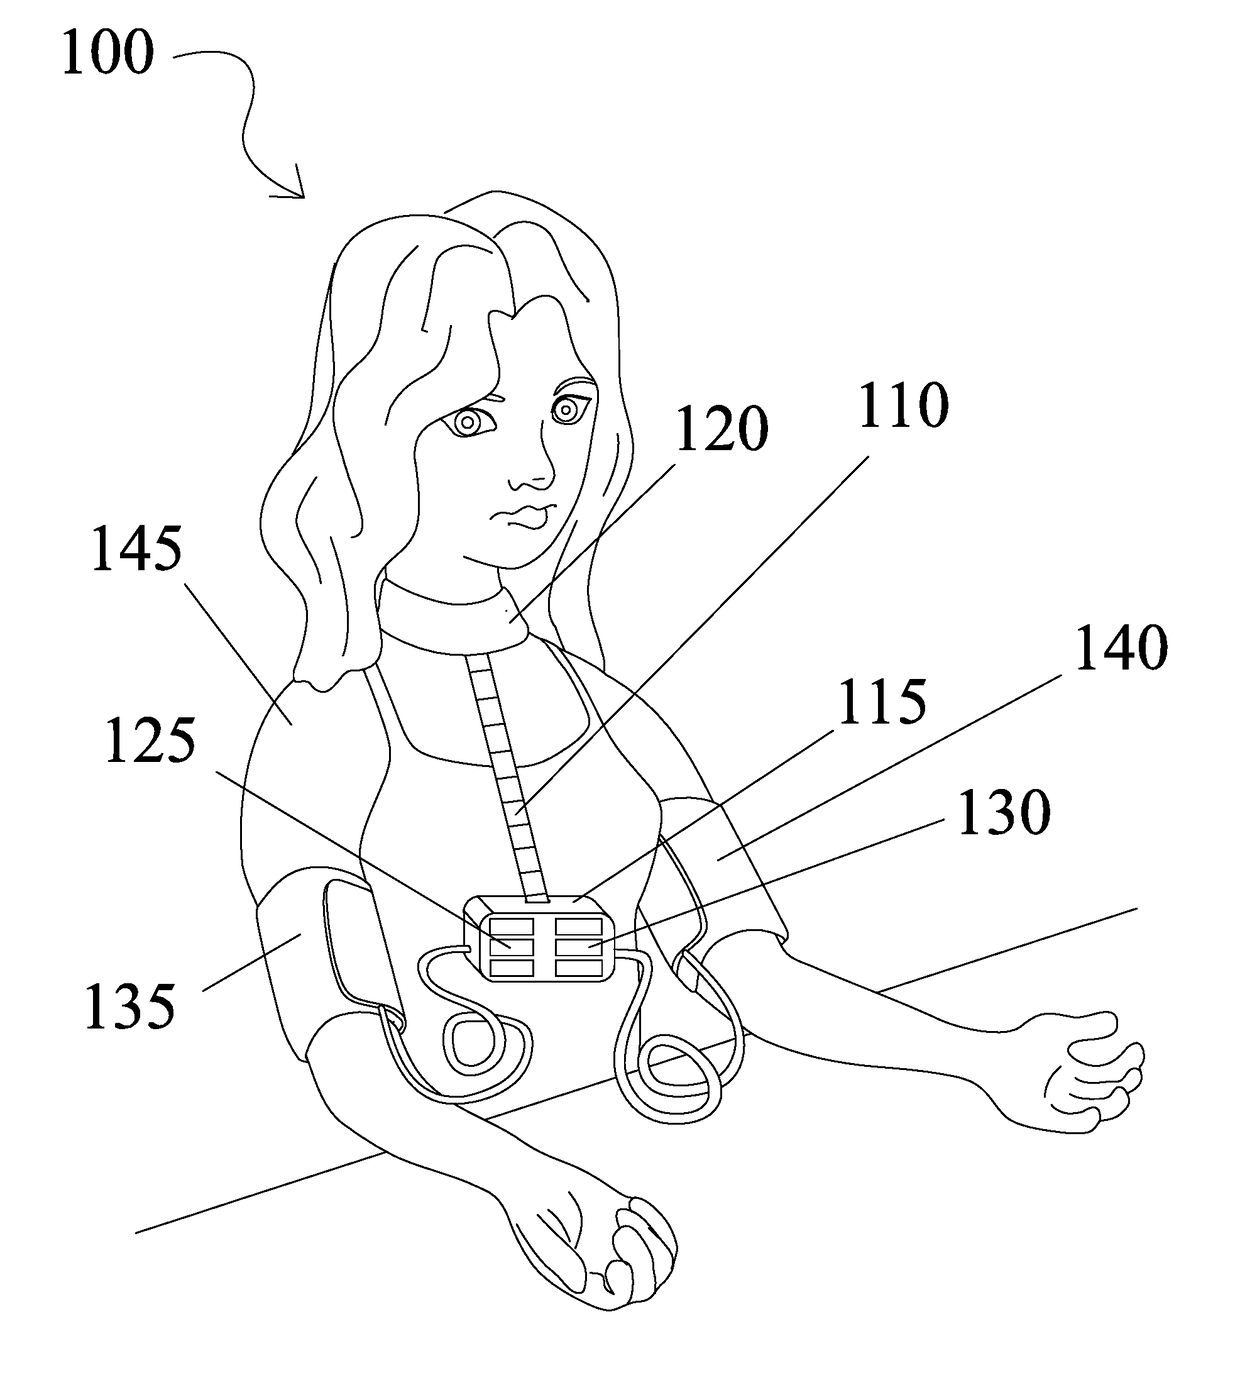 Simultaneous bi-lateral blood pressure system with position indicator